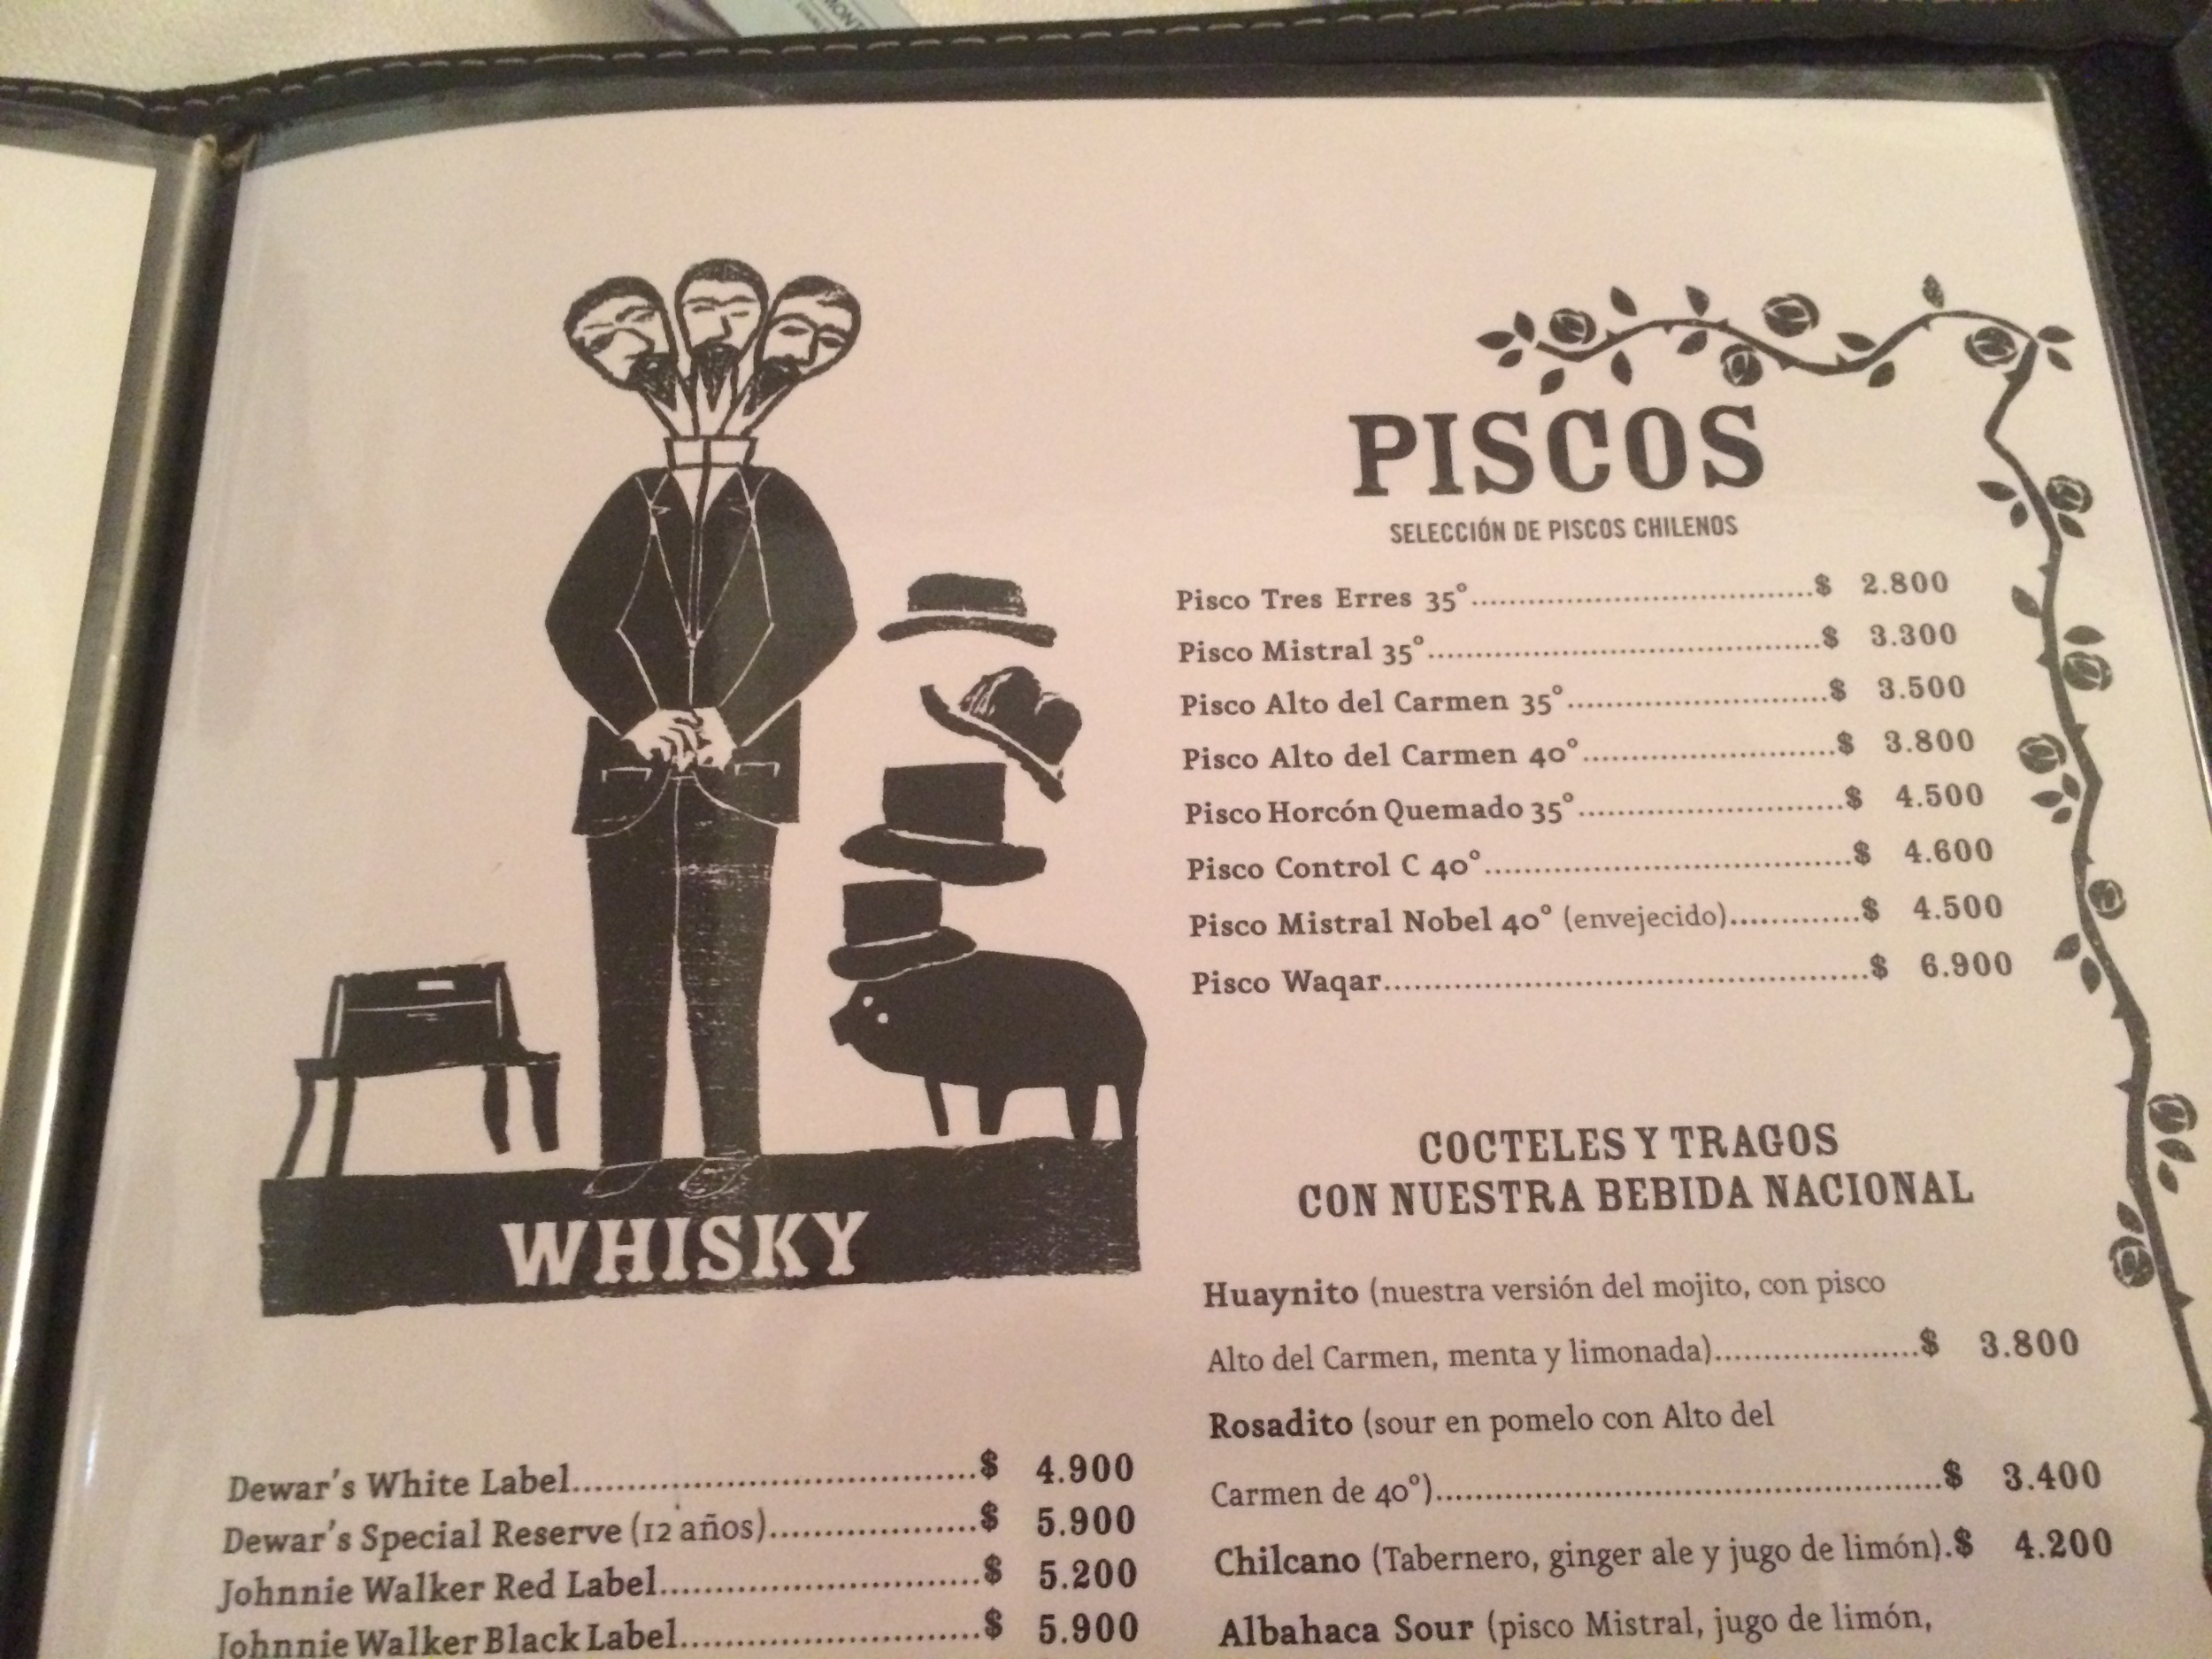 Piscola, pisco sour, pisco this, pisco that, but most importantly; no pisco, no disco! 